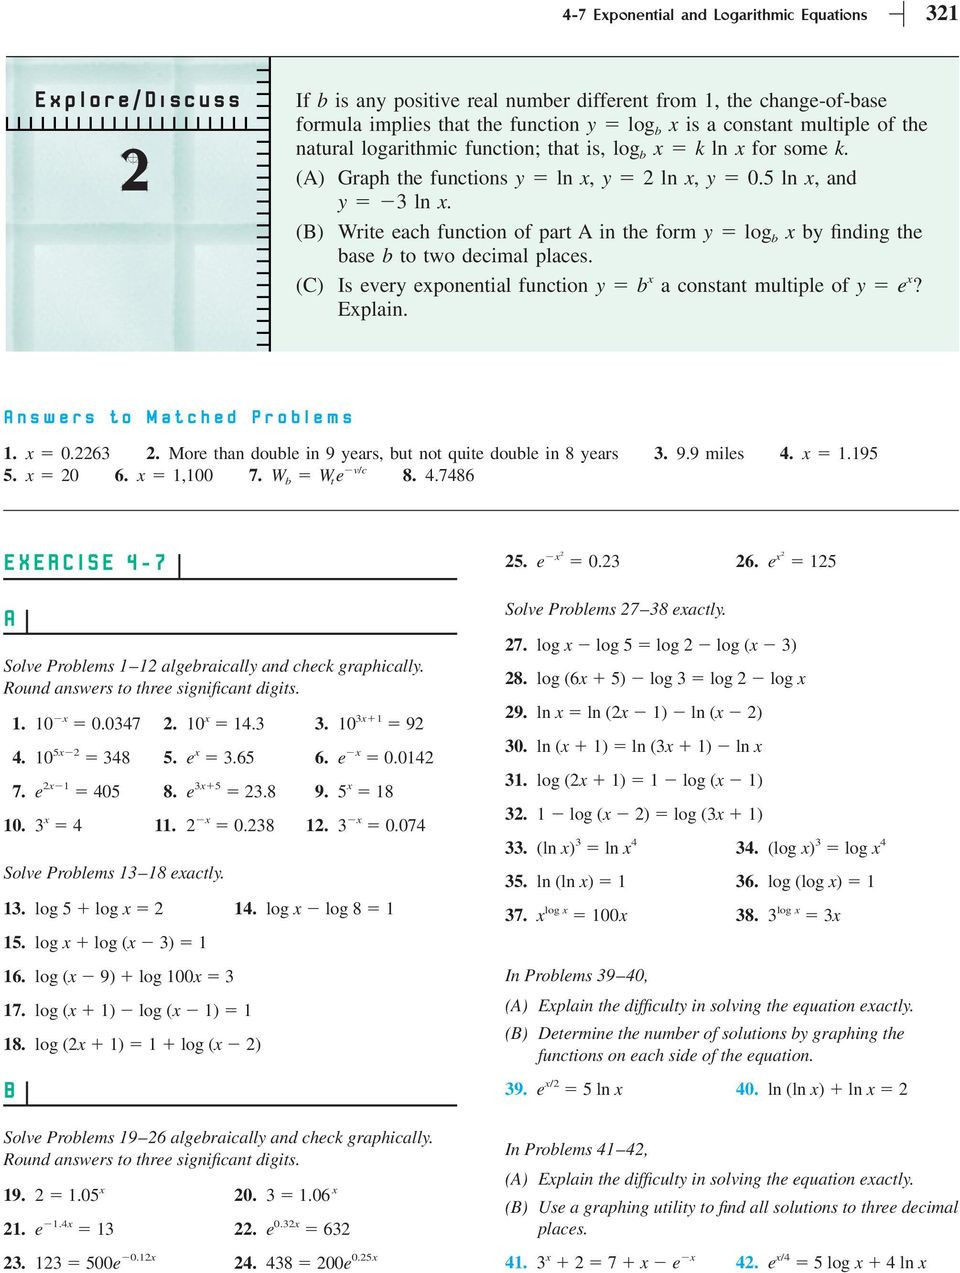 Exponential Function Word Problems Worksheet Section 4 7 Exponential and Logarithmic Equations solving